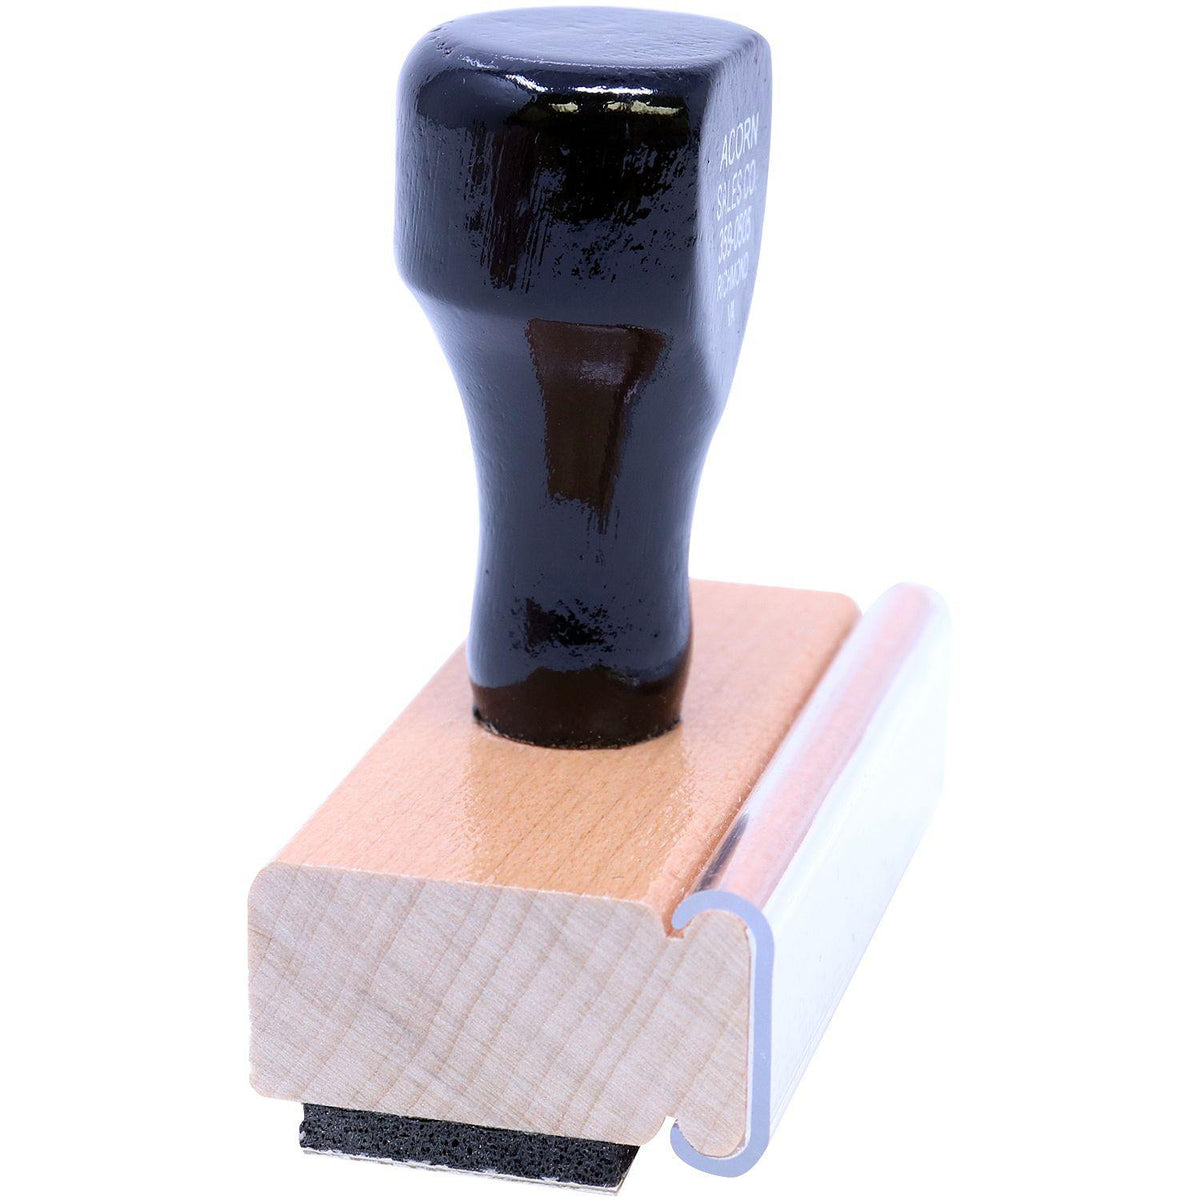 Photographs Do Not Bend Rubber Stamp - Engineer Seal Stamps - Brand_Acorn, Impression Size_Small, Stamp Type_Regular Stamp, Type of Use_Shipping &amp; Receiving